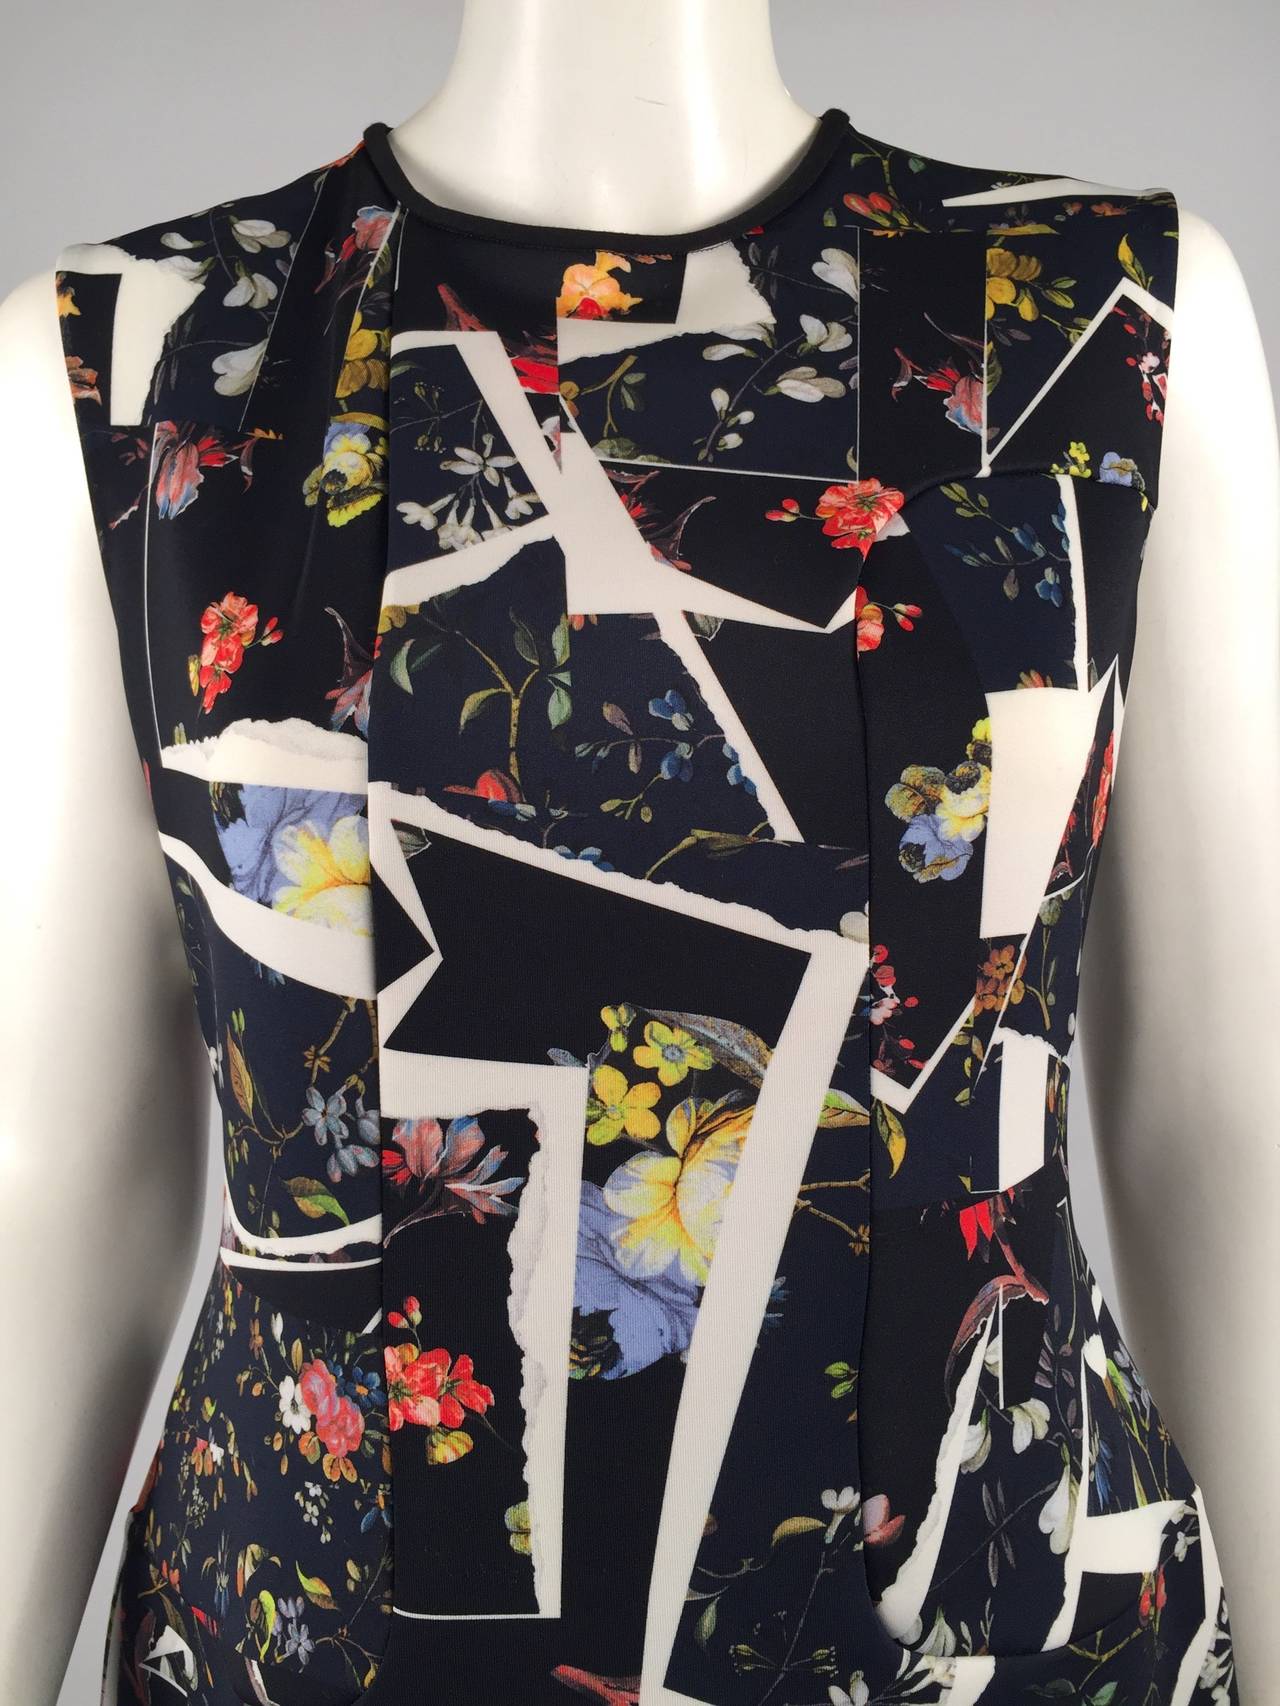 Erdem Black Multicolor Print Sleeveless Sheath Dress In Excellent Condition For Sale In Palm Beach, FL